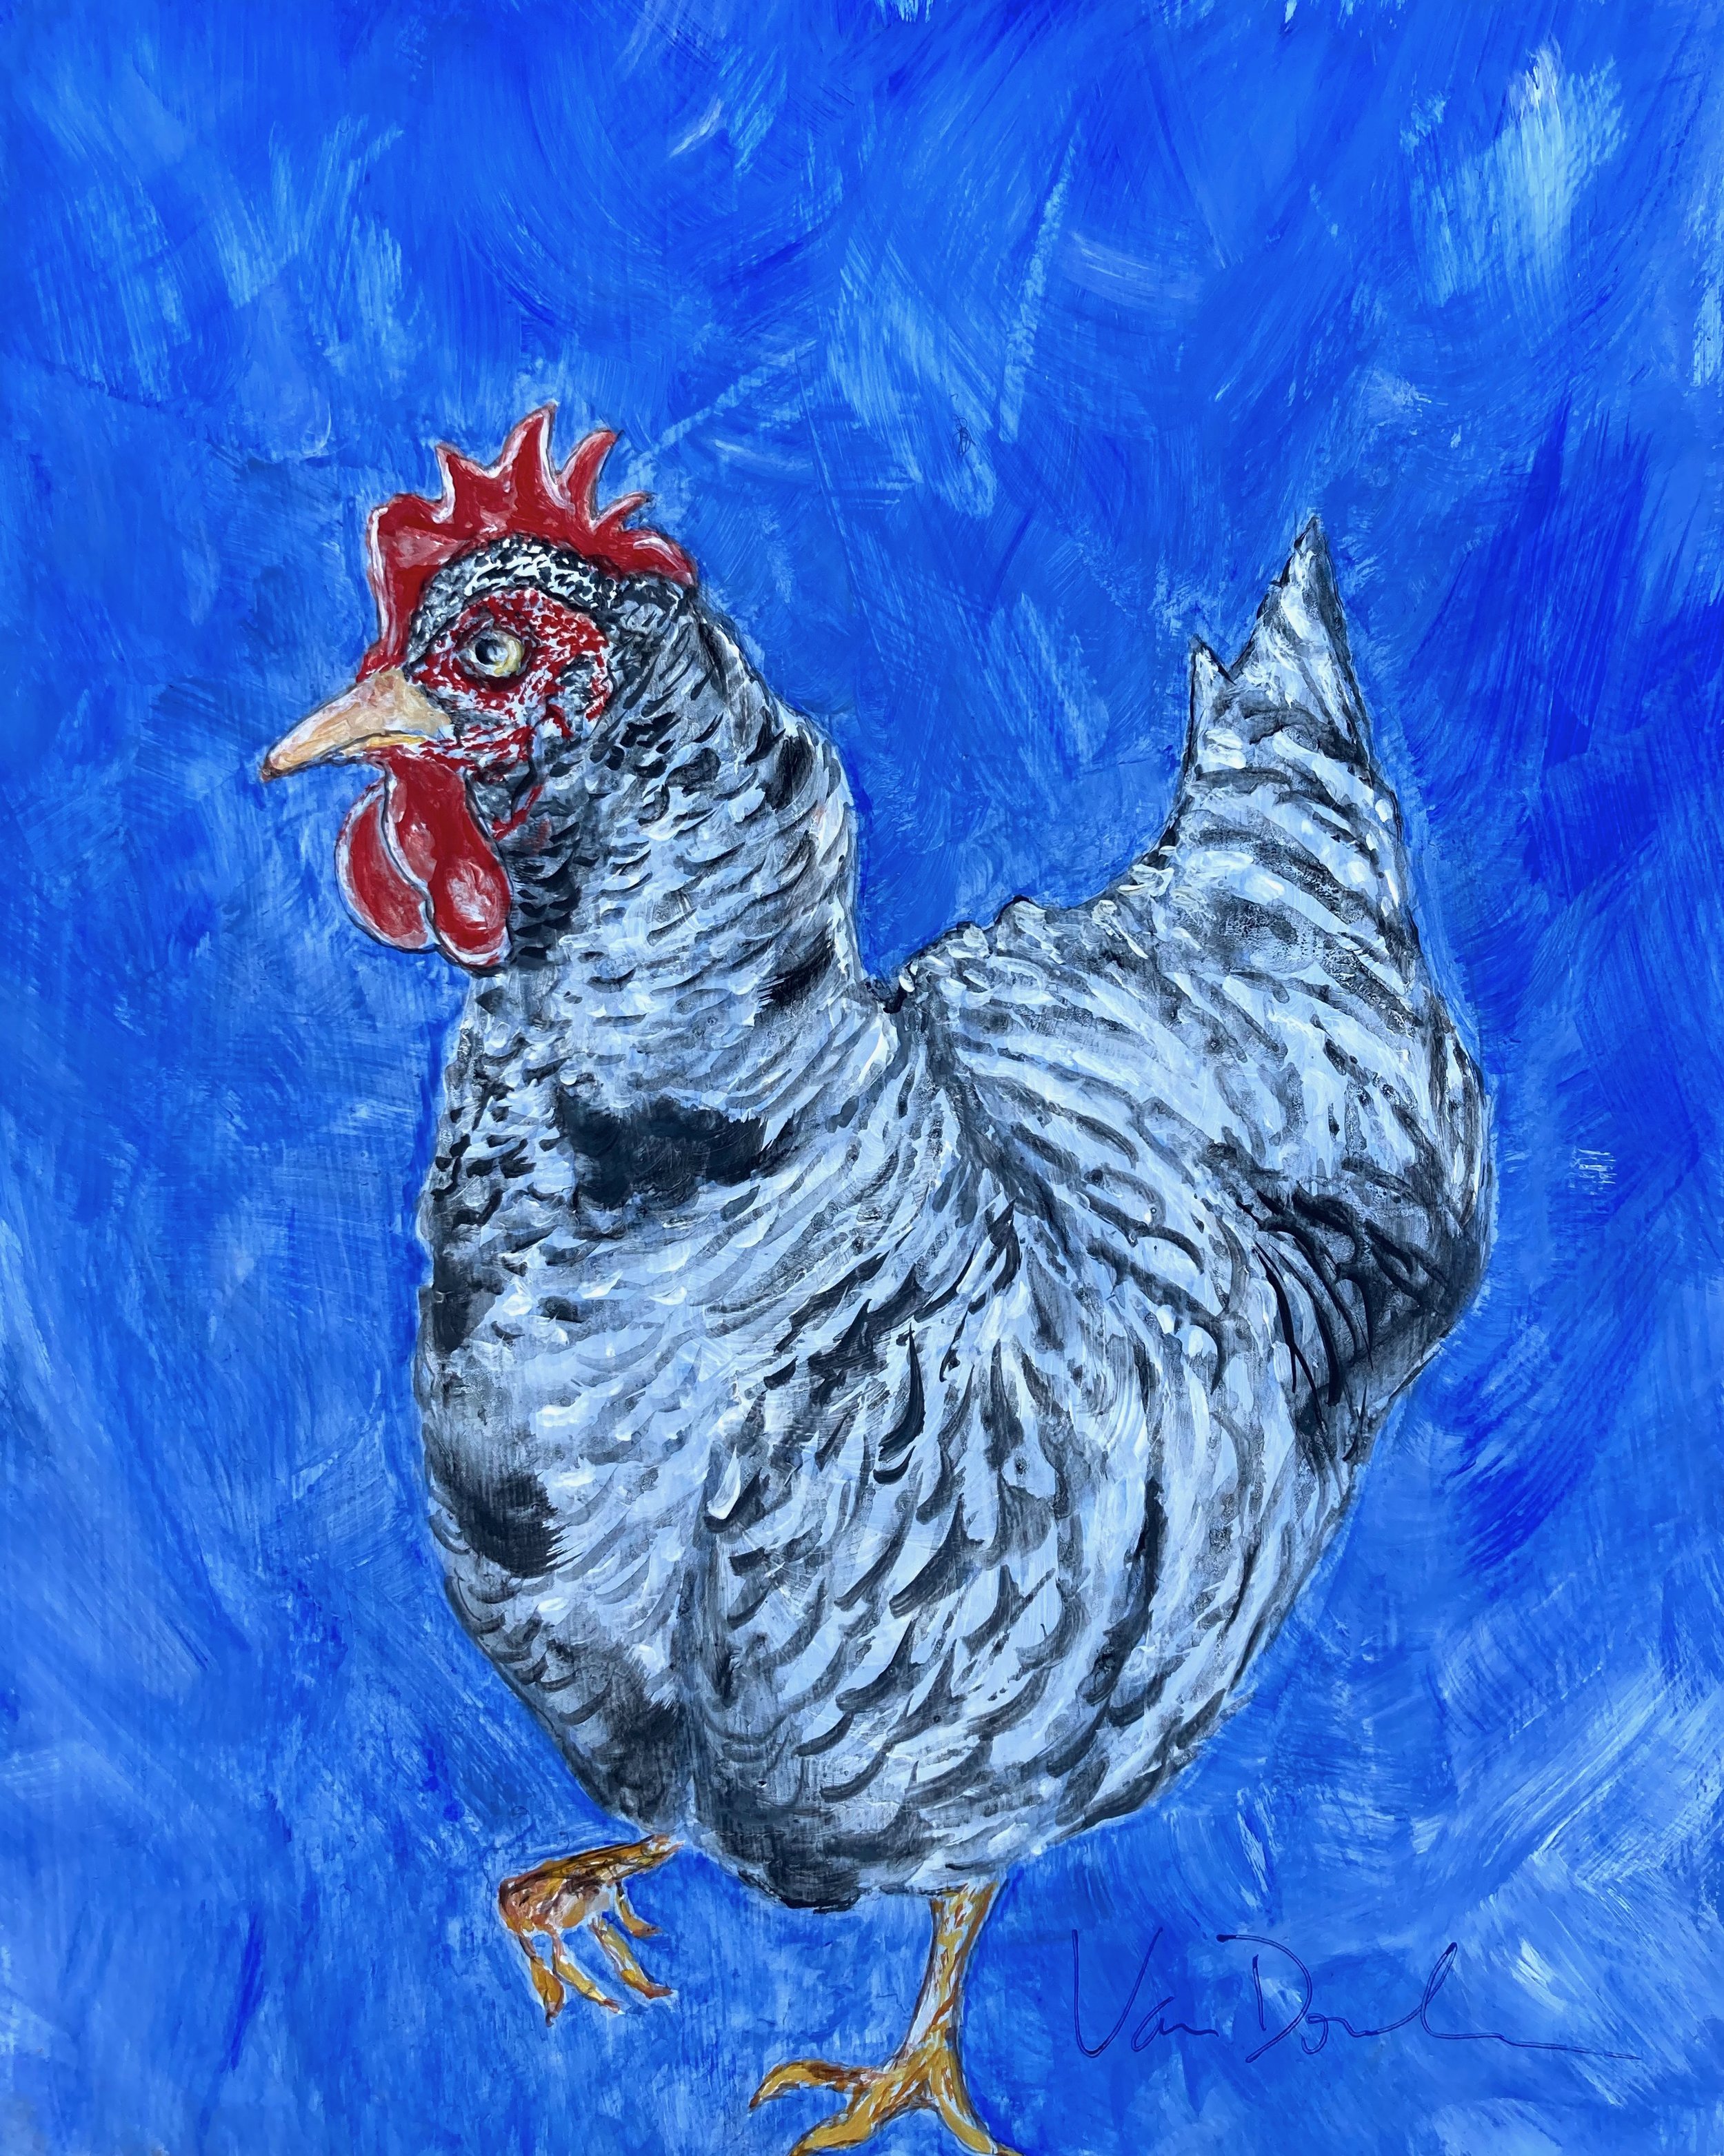 Barred Rock Hen, acrylic on paper, aprox 8x10